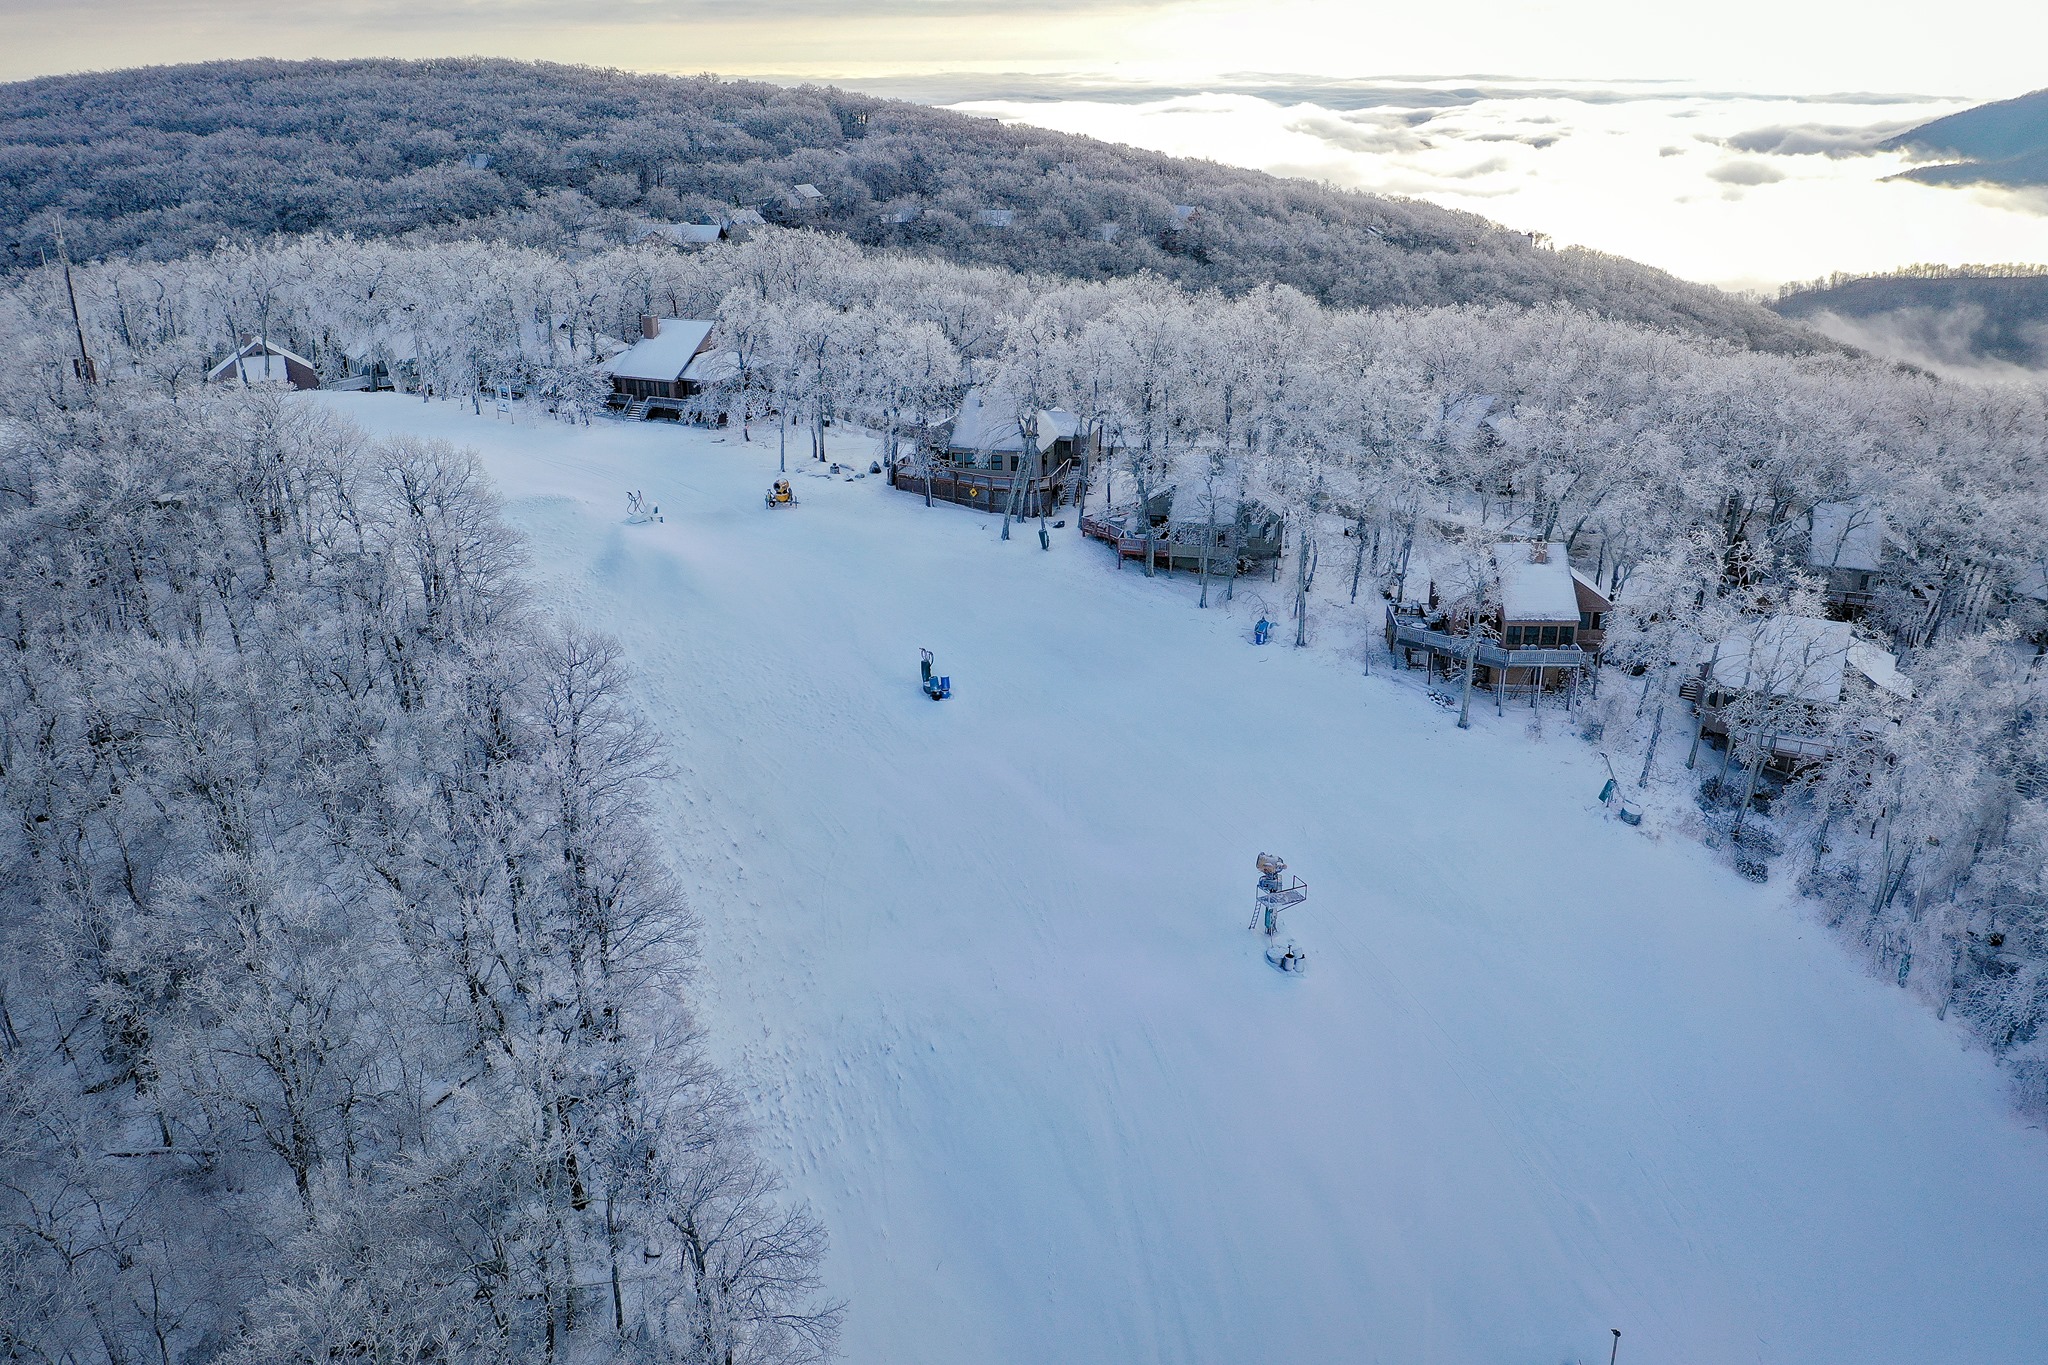 Wintergreen Is Virginia’s Winter Playground, Where You Can Go Snow Tubing, Skiing, And More